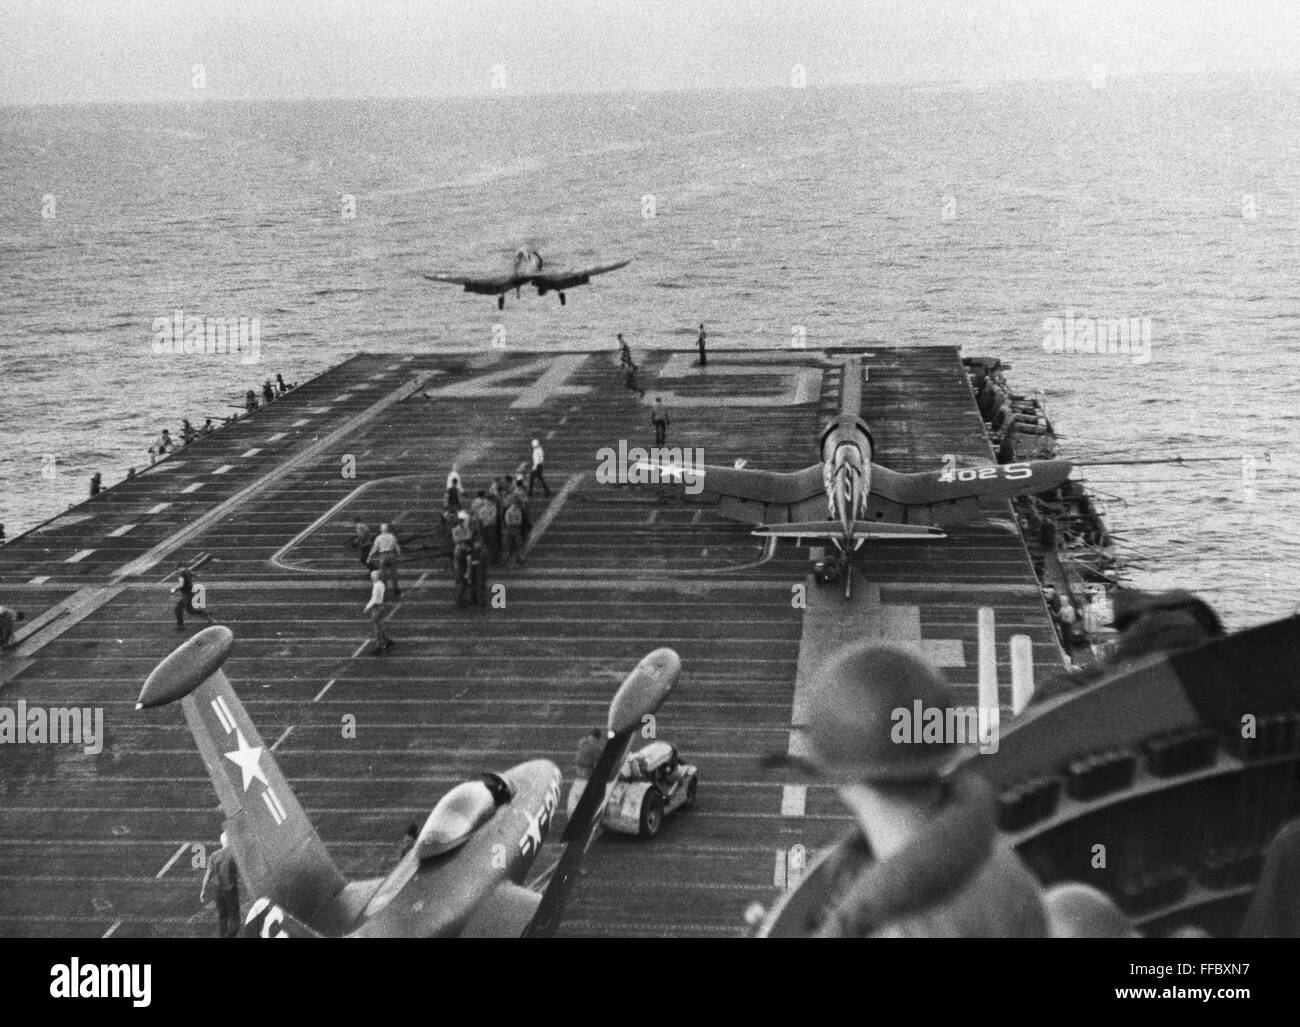 KOREAN WAR: AIRCRAFT, 1950. /nAmerican fighter planes takeoff from a U ...